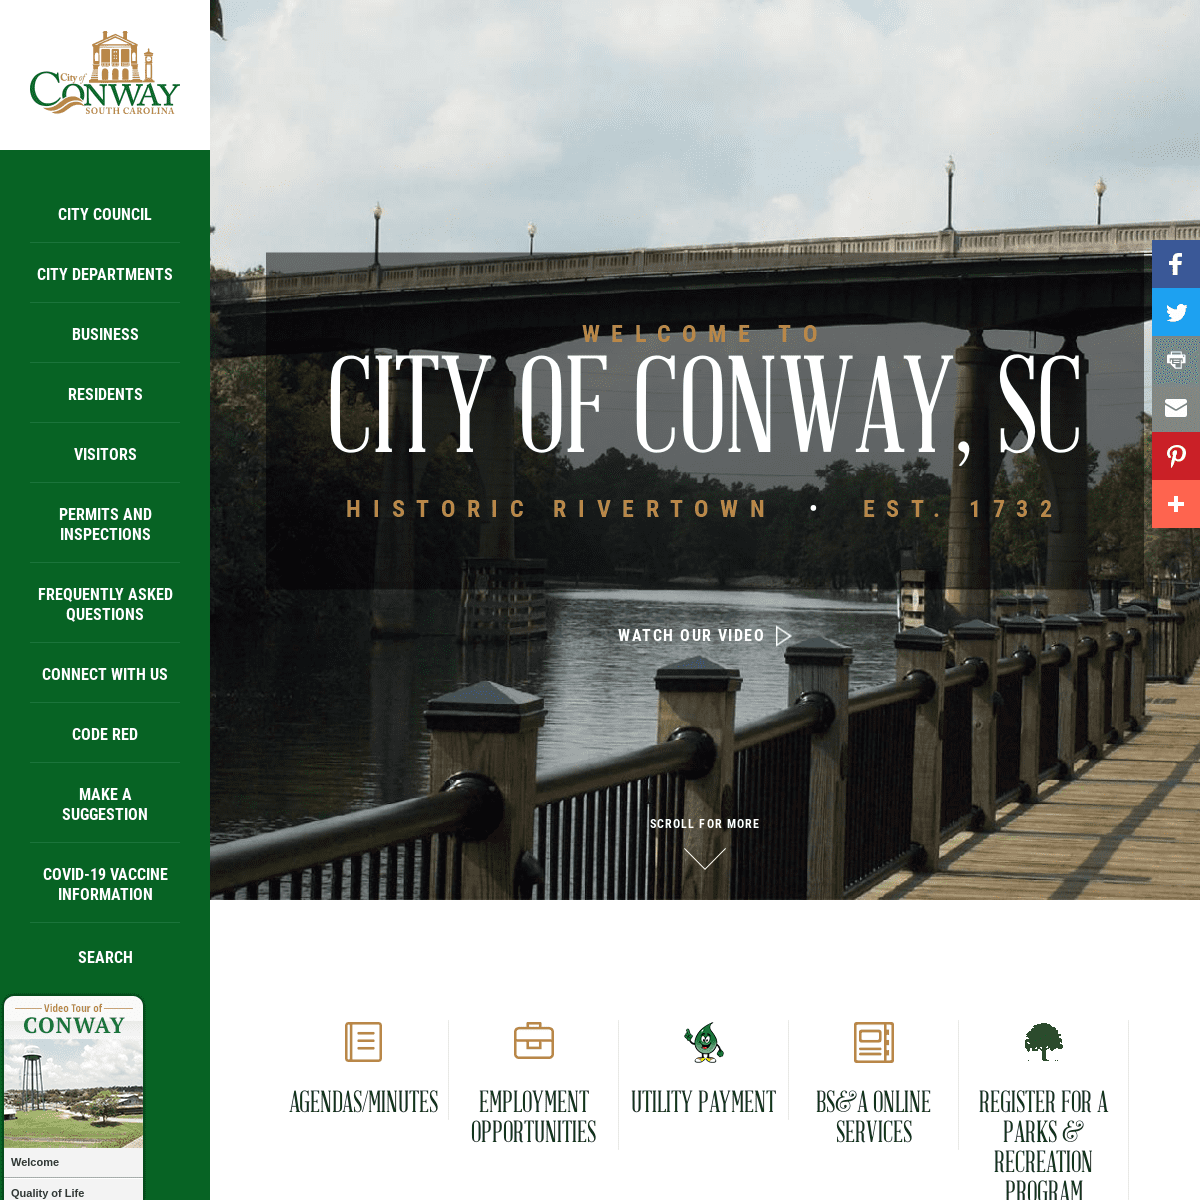 A complete backup of https://cityofconway.com